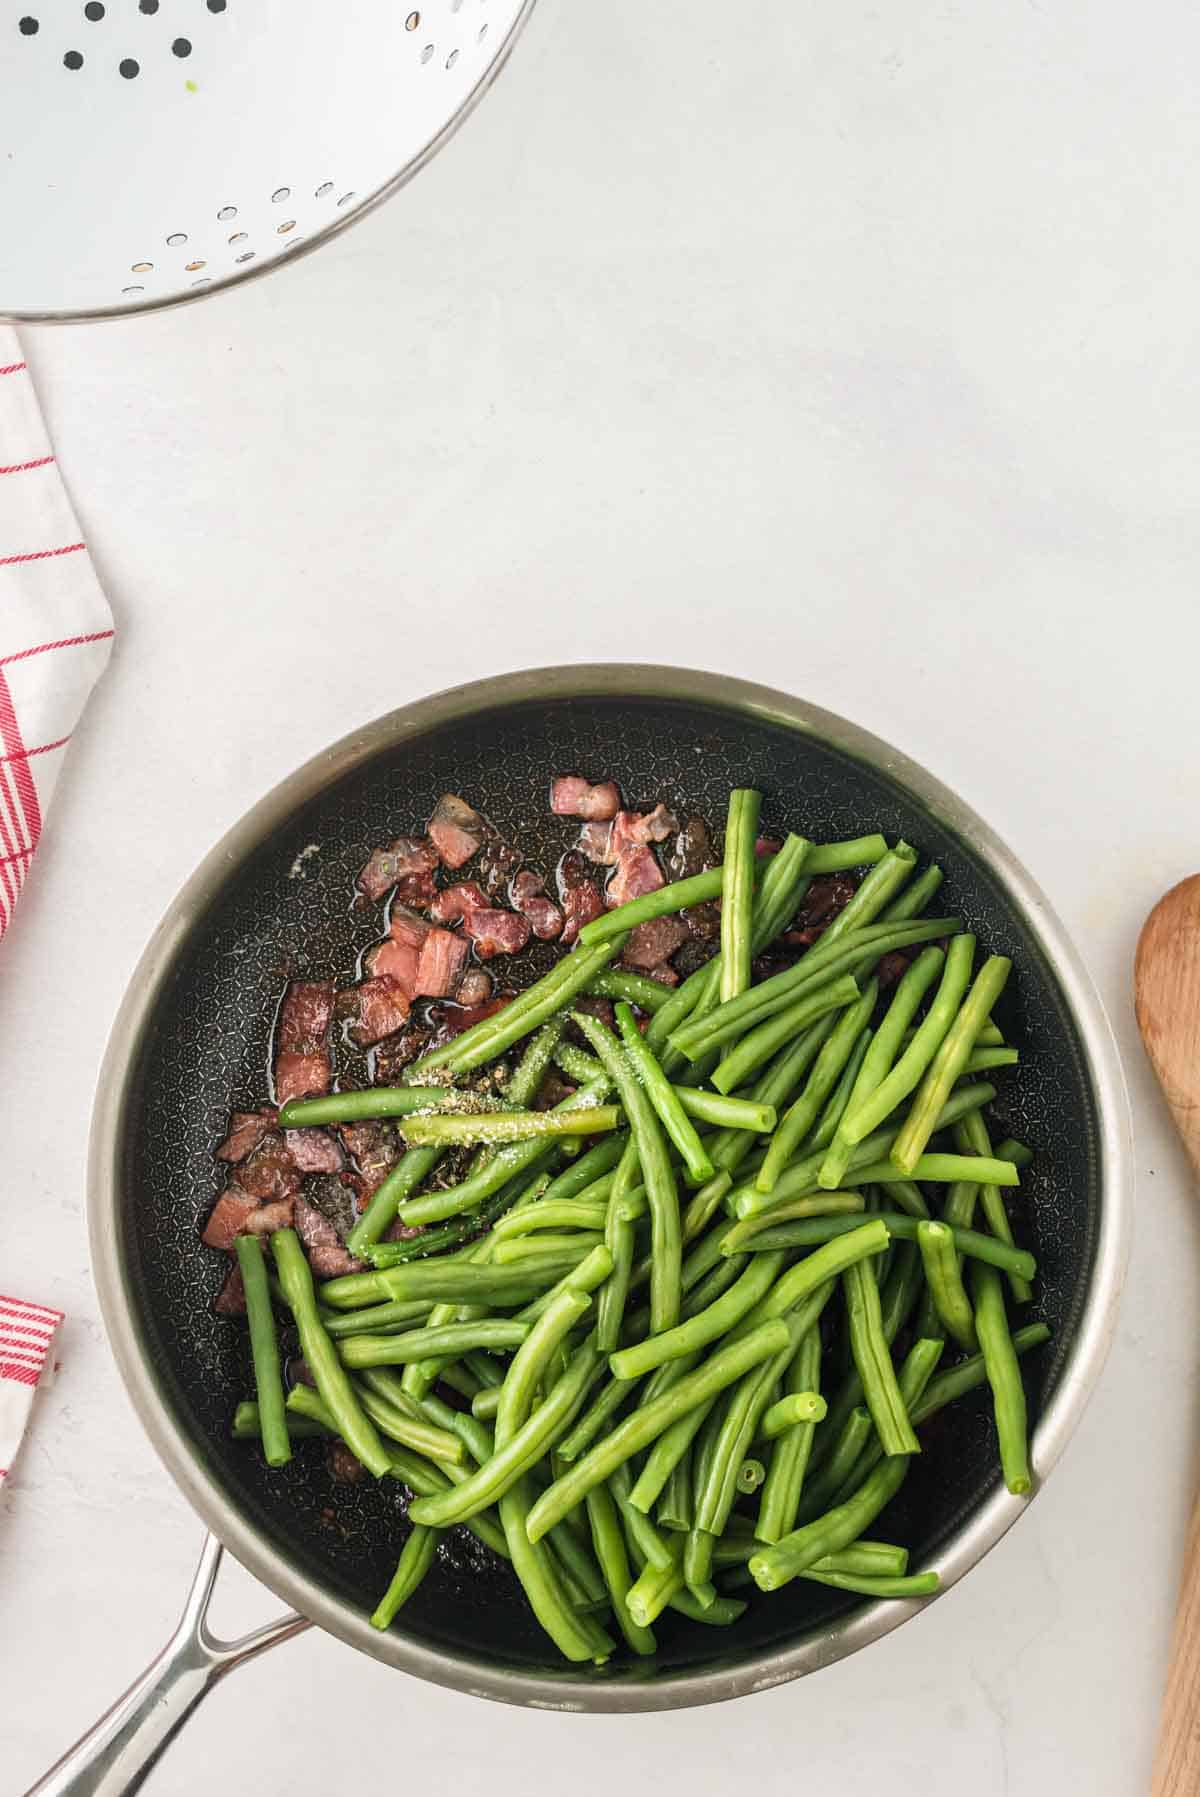 Adding green beans to bacon cooked in a skillet.